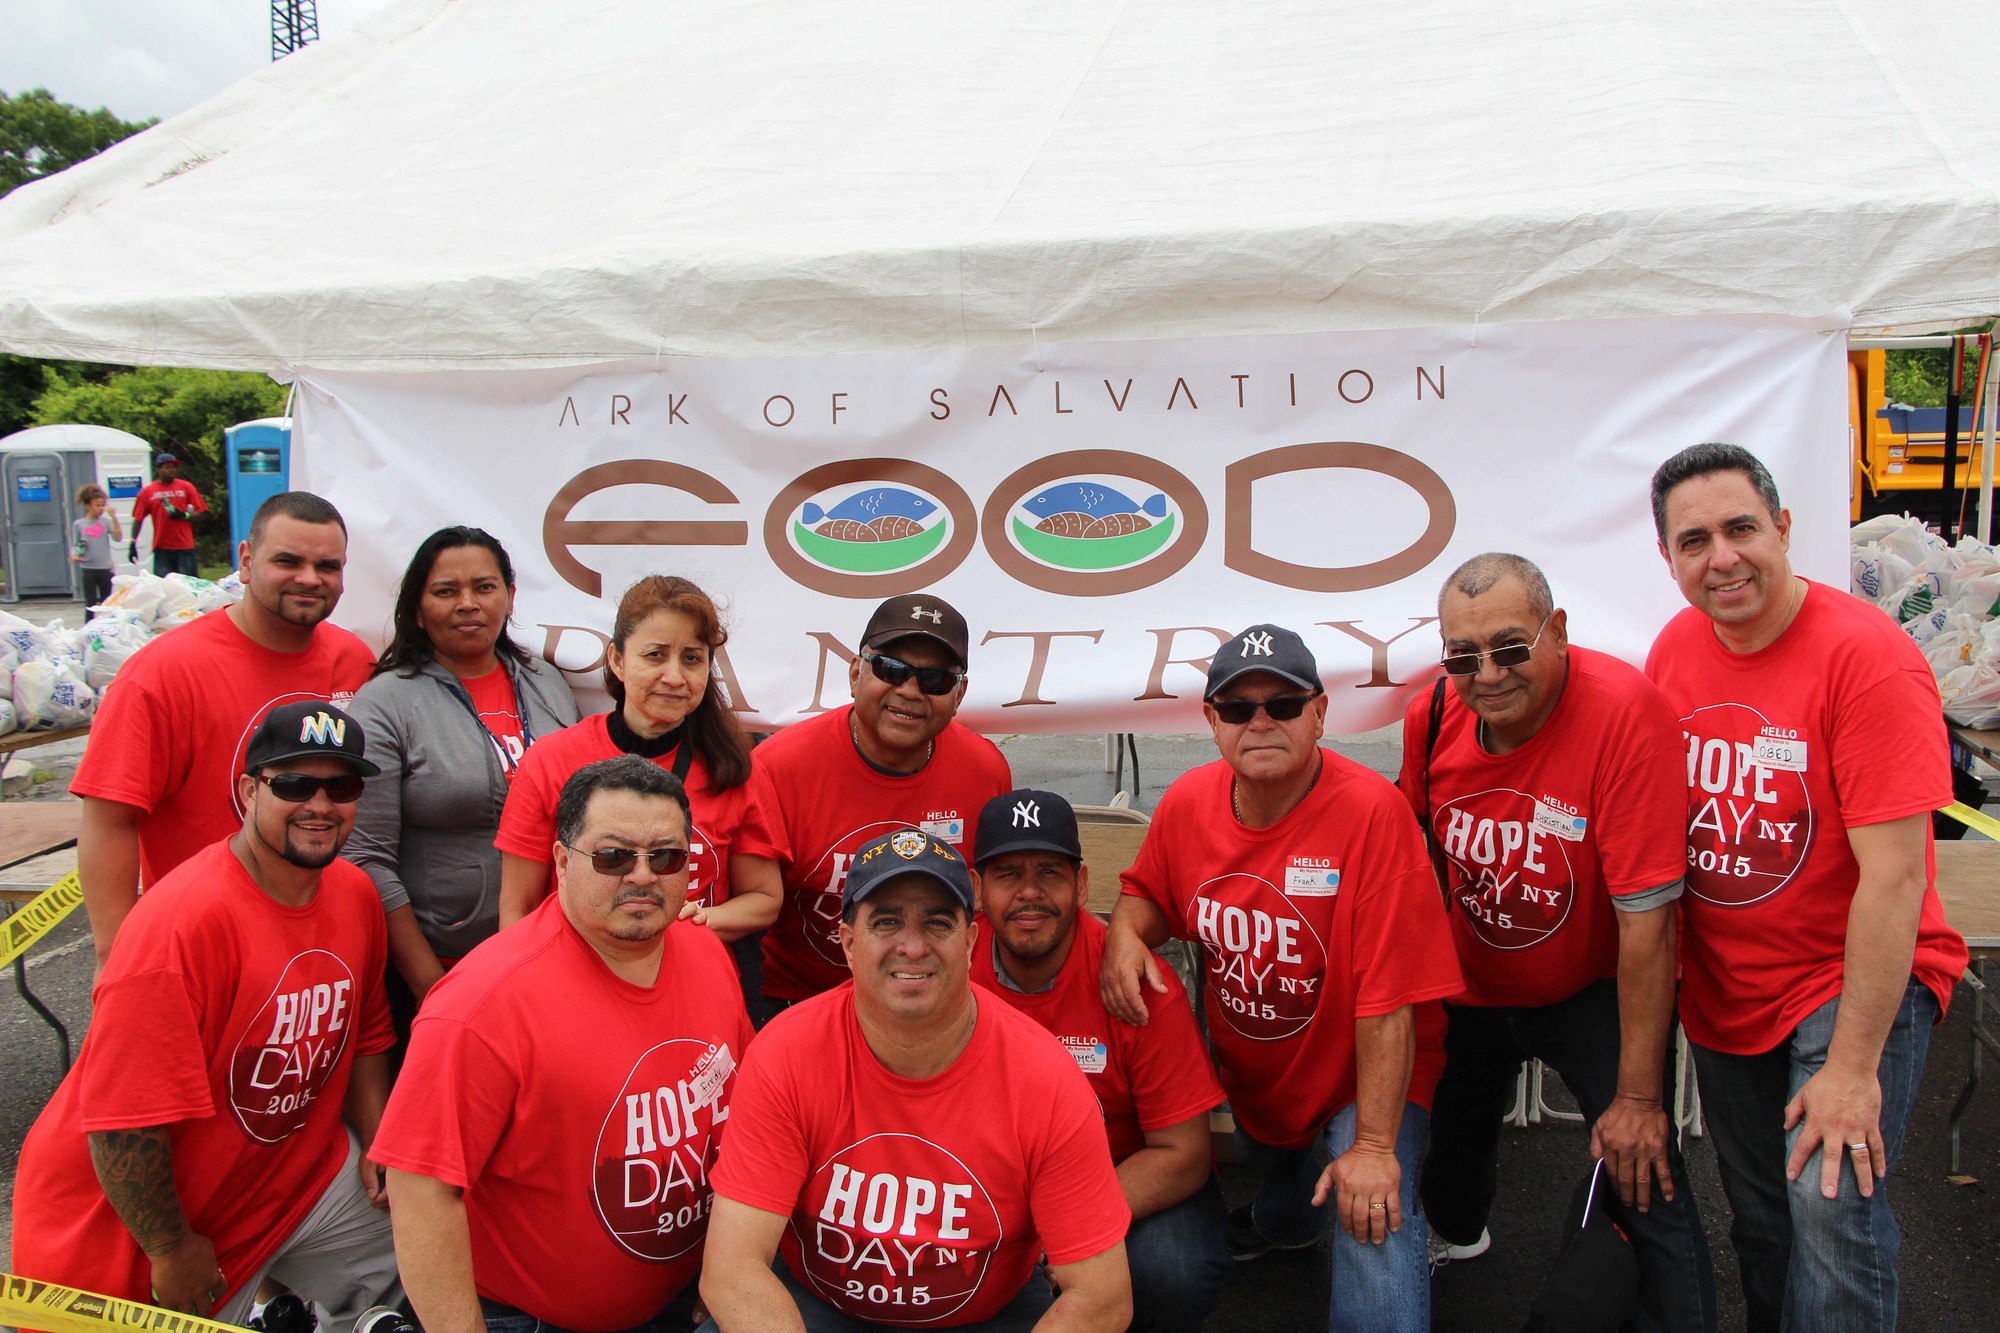 A community block party was held on June 6 at the Baldwin Long Island Rail Road station to coincide with Hope Day NY. Volunteers from many local churches, including members of the Ark of Salvation Church in Oceanside, volunteered to make the afternoon a success.